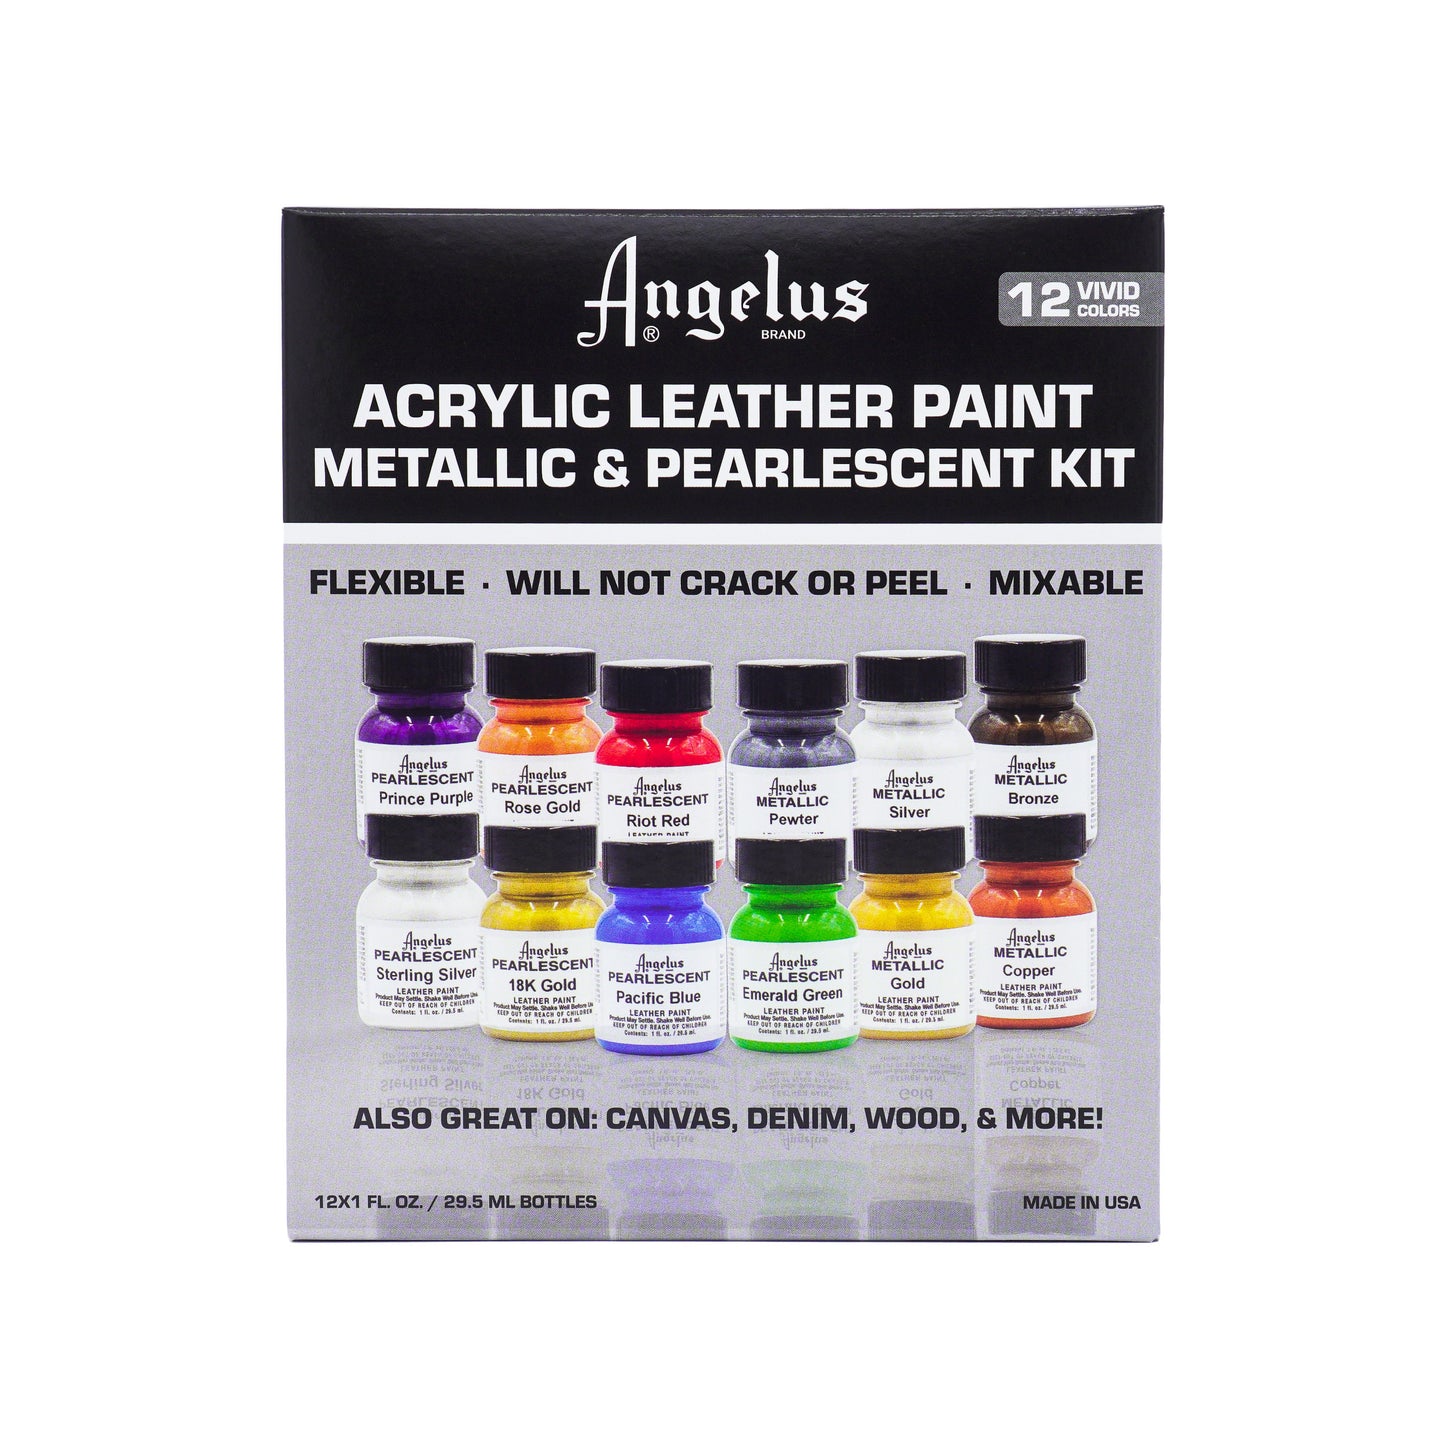 Angelus Metallic and Pearlescent Kit Box - 12 Colors